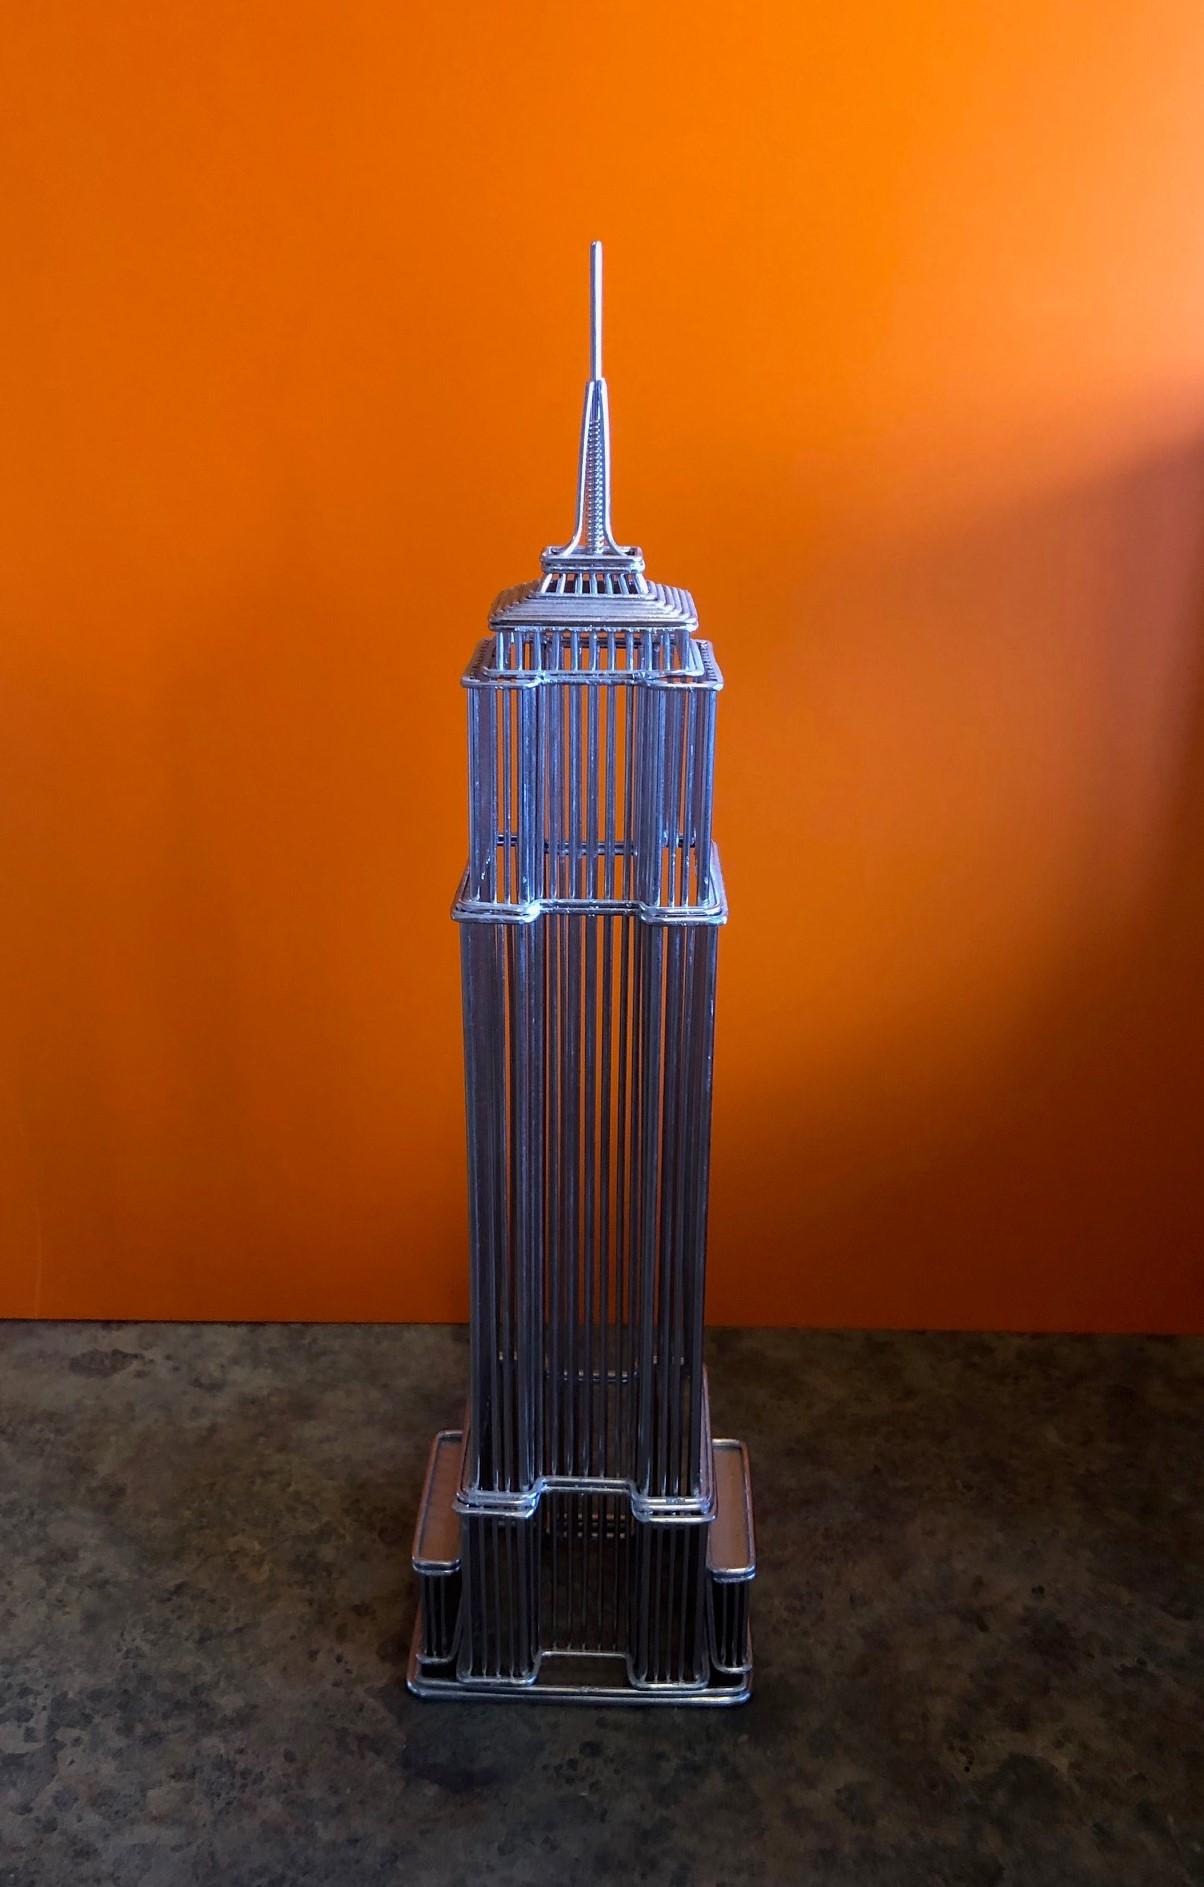 Nice desktop model of the iconic Empire State building in New York City. The sculpture is 12.5